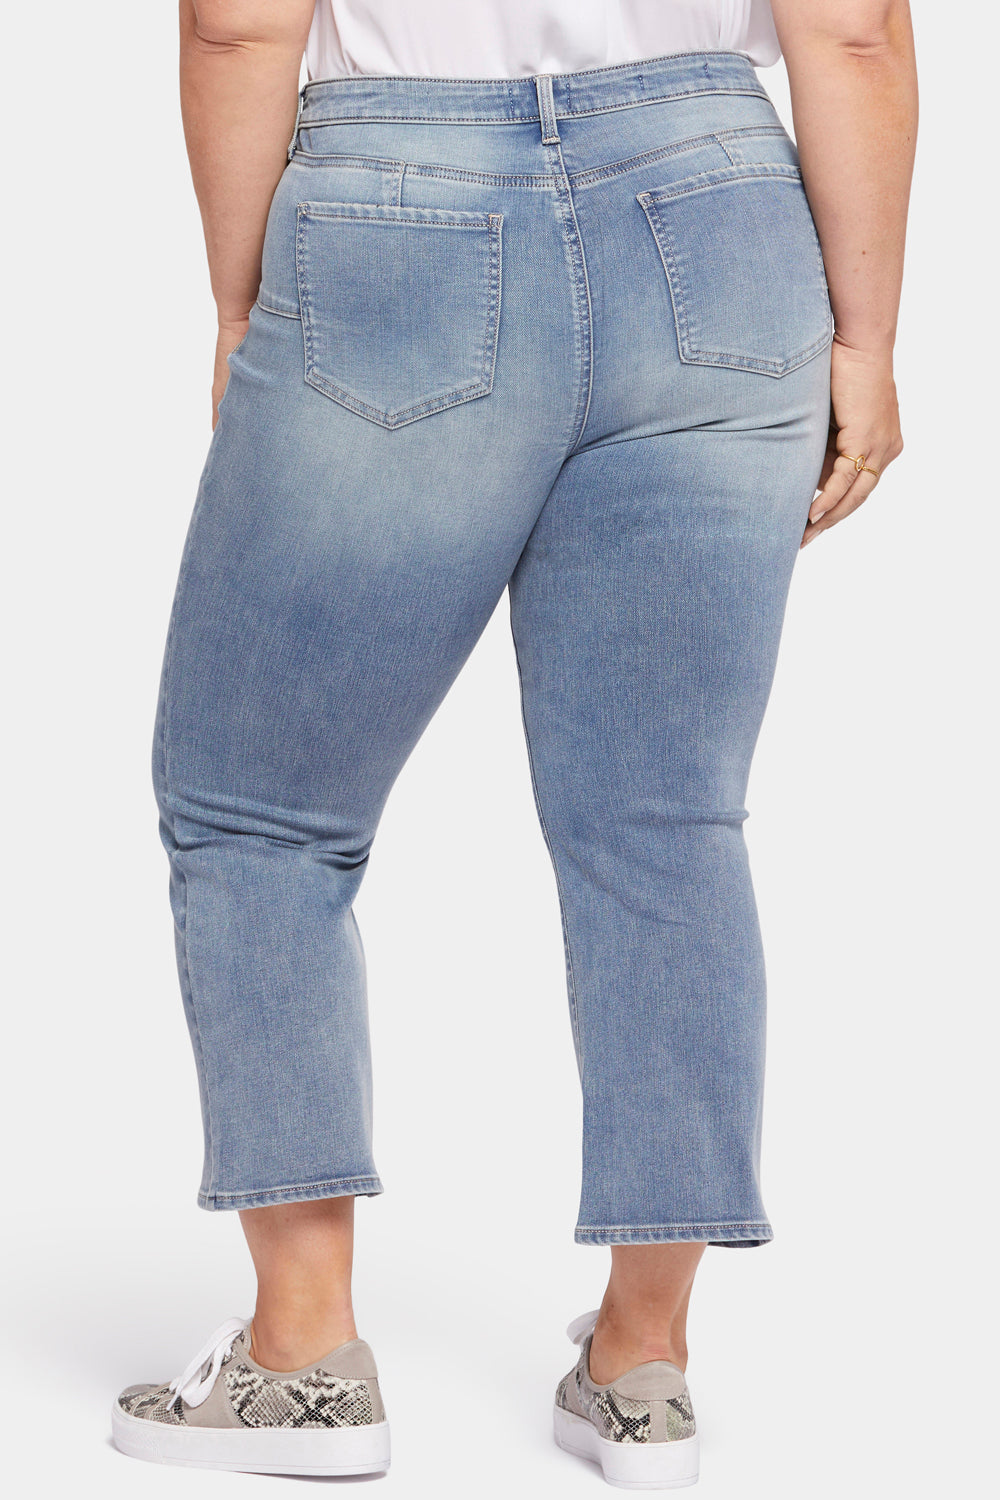 NYDJ Uplift Fiona Slim Flared Ankle Jeans In Plus Size In Future Fit Denim® - Spellbound